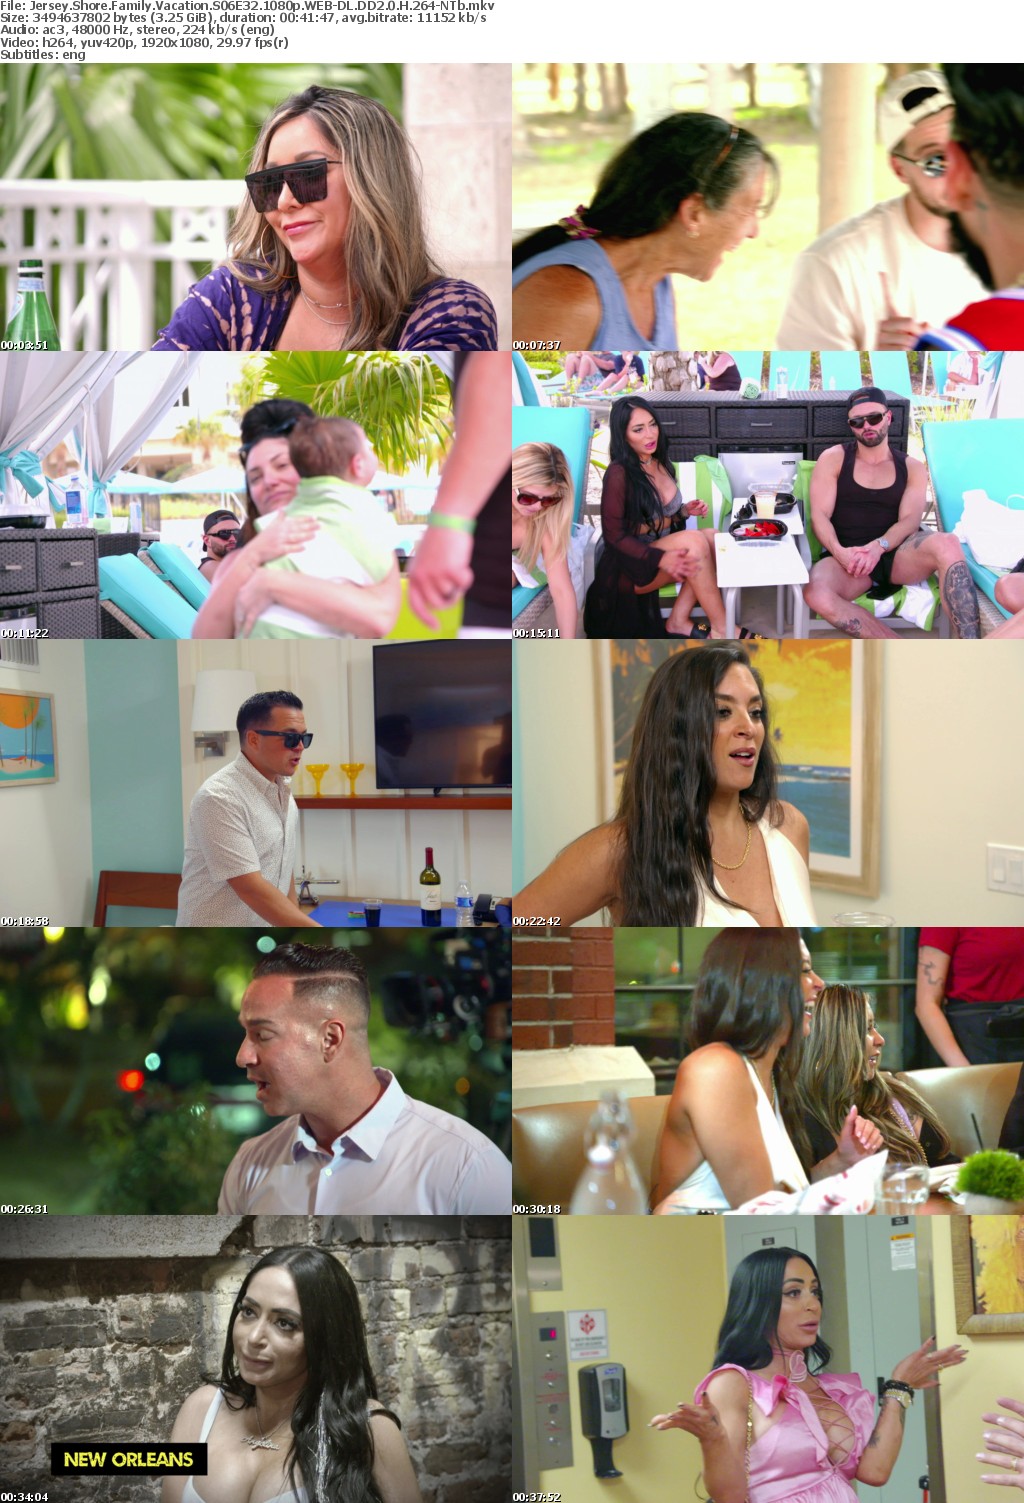 Jersey Shore Family Vacation S06E32 1080p WEB-DL DD2 0 H 264-NTb